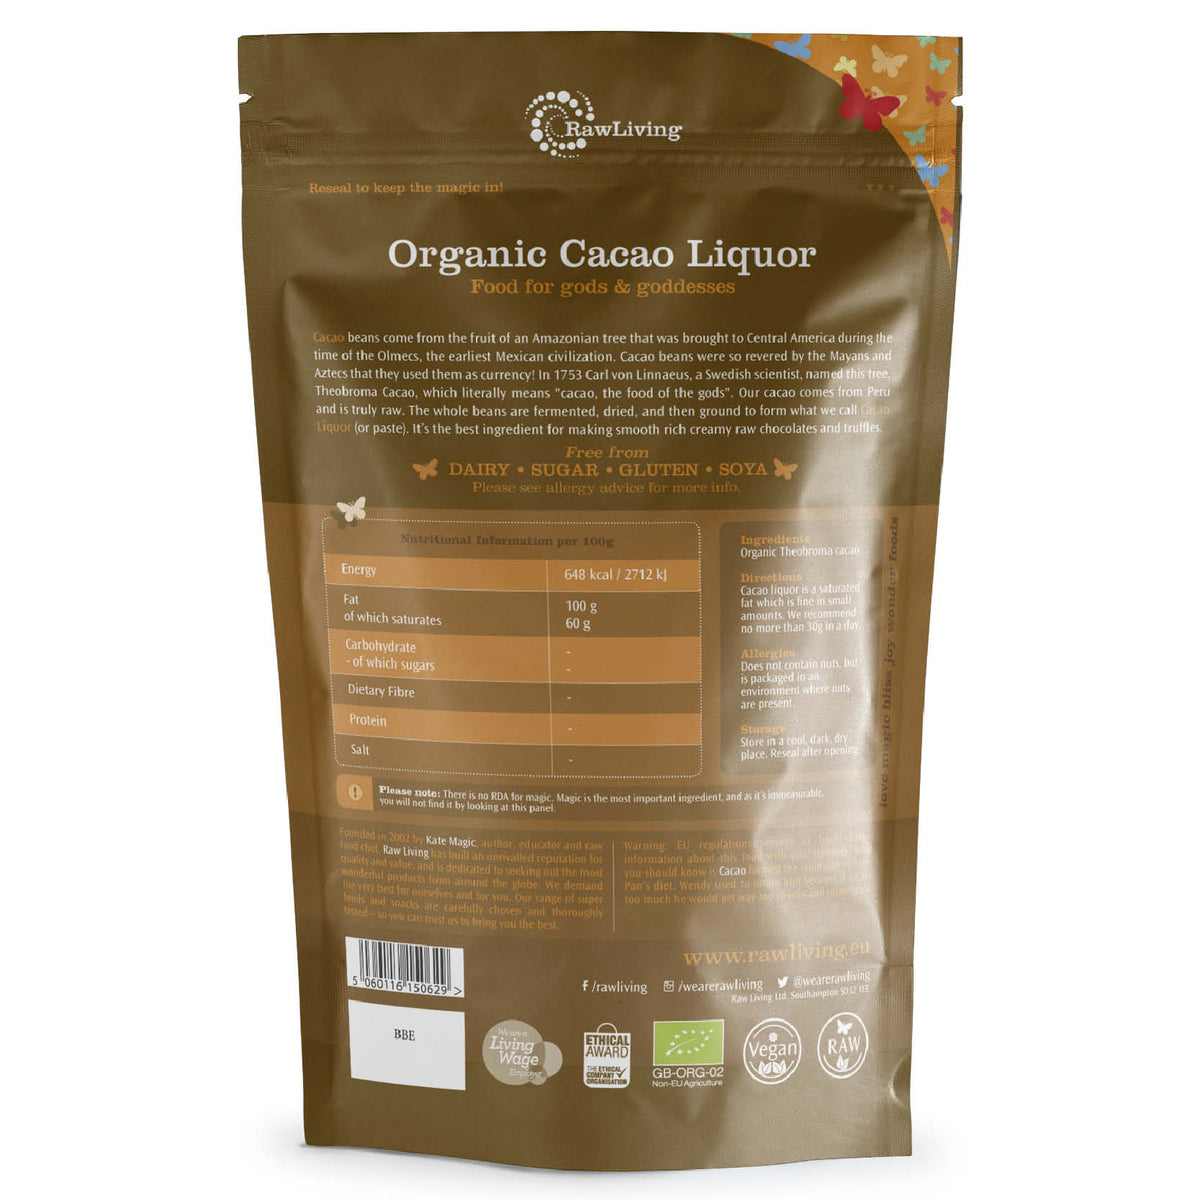 Organic Cacao Liquor Peruvian | Raw Living UK | Raw Foods | Super Foods | Raw Living Raw Organic Unroasted Peruvian Cacao Liquor is made by pressing the whole cacao bean and heating it at very low temperatures until it forms a paste.